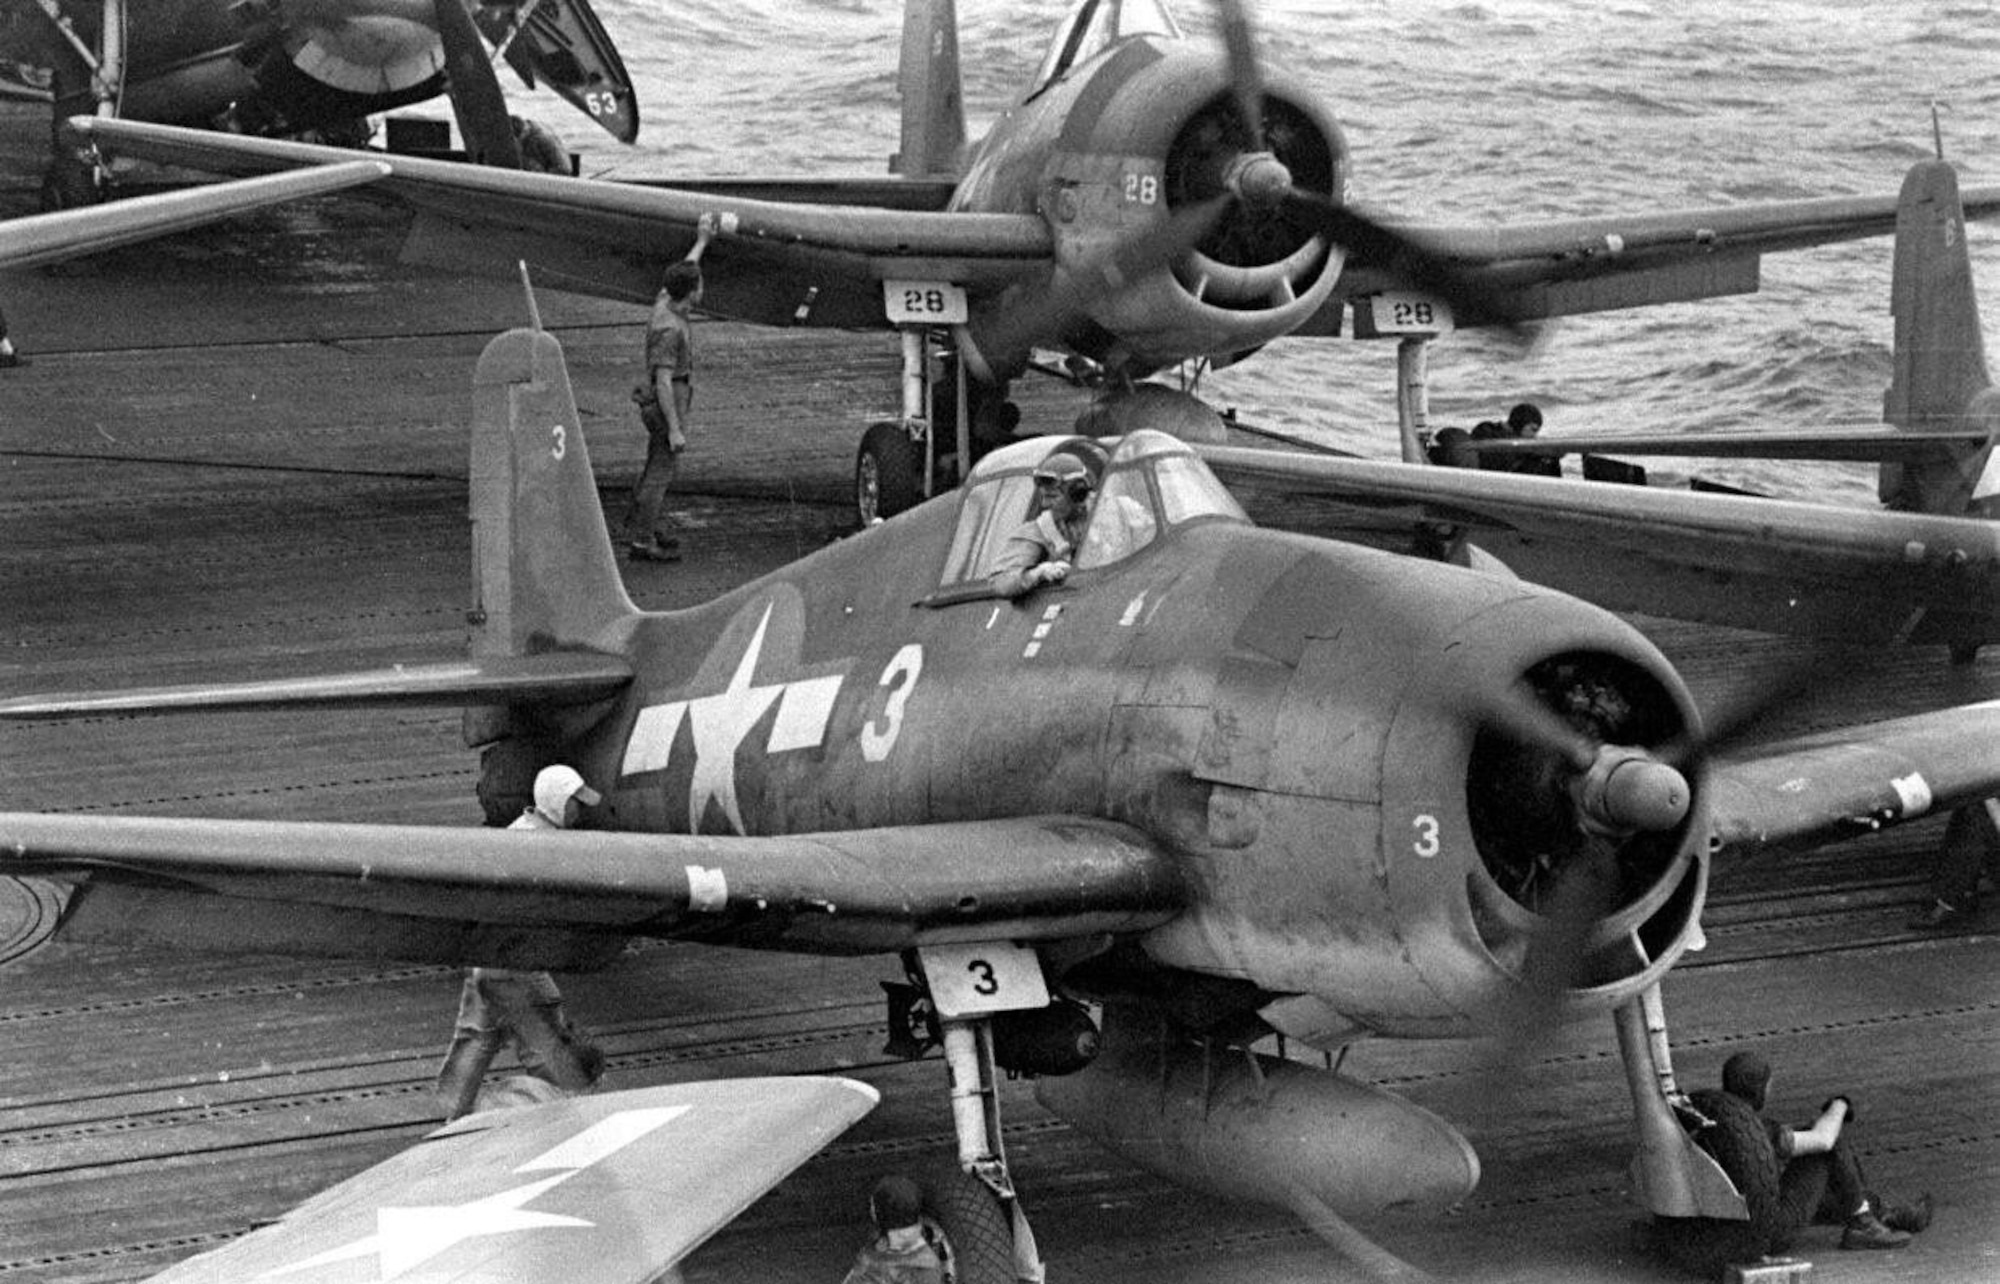 The Navy F-6F Hellcat, such as these assigned to the second USS Lexington, in summer 1944, conducted many of the attacks on Japanese aircraft during the battle of the Philippine Sea. It served as the Navy's dominant fighter in the second half of the Pacific War.